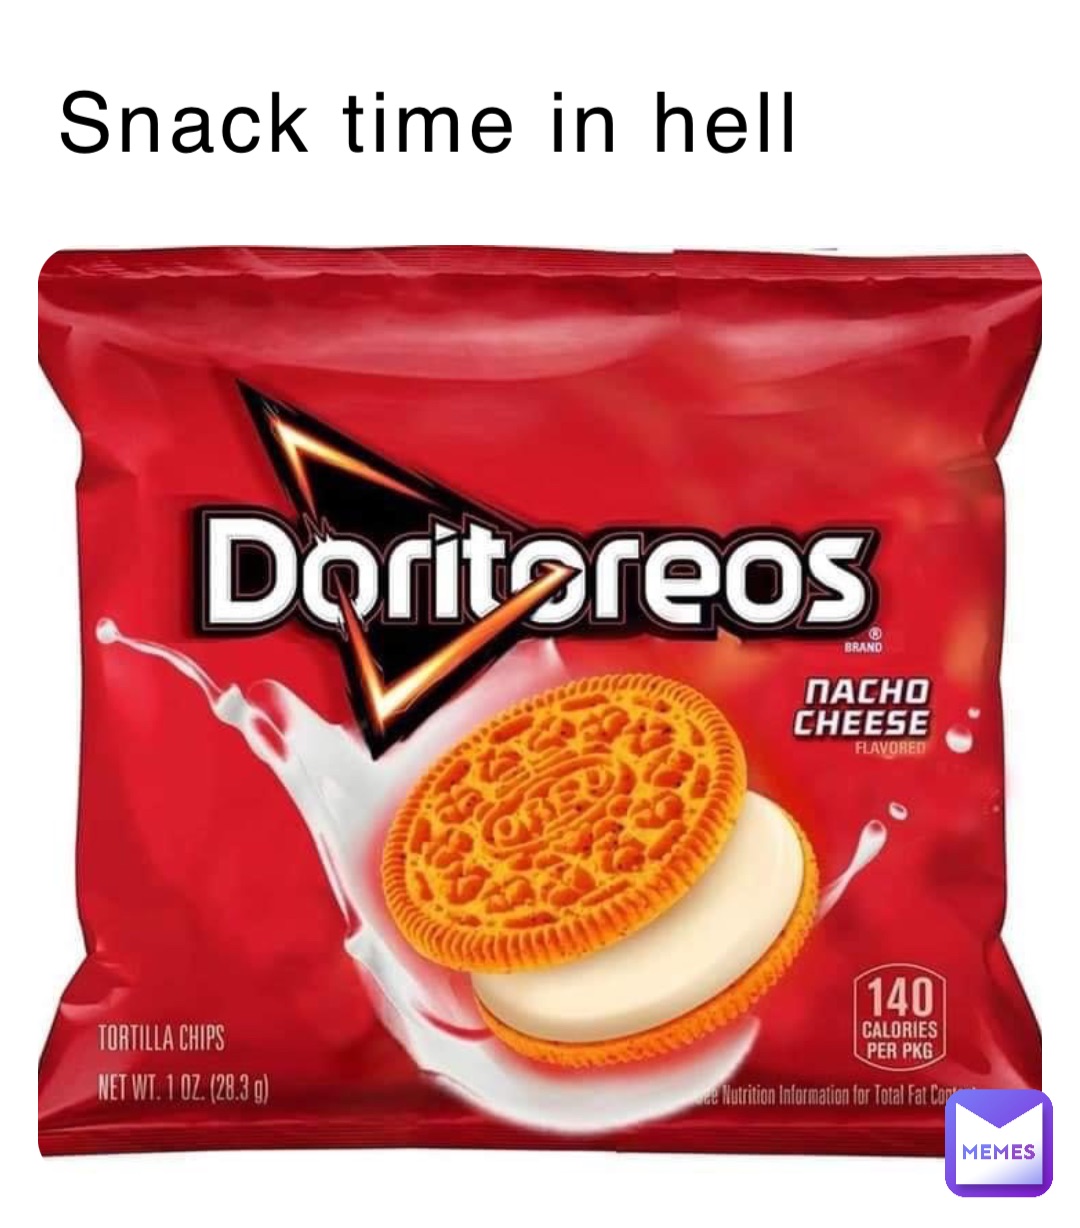 Snack time in hell